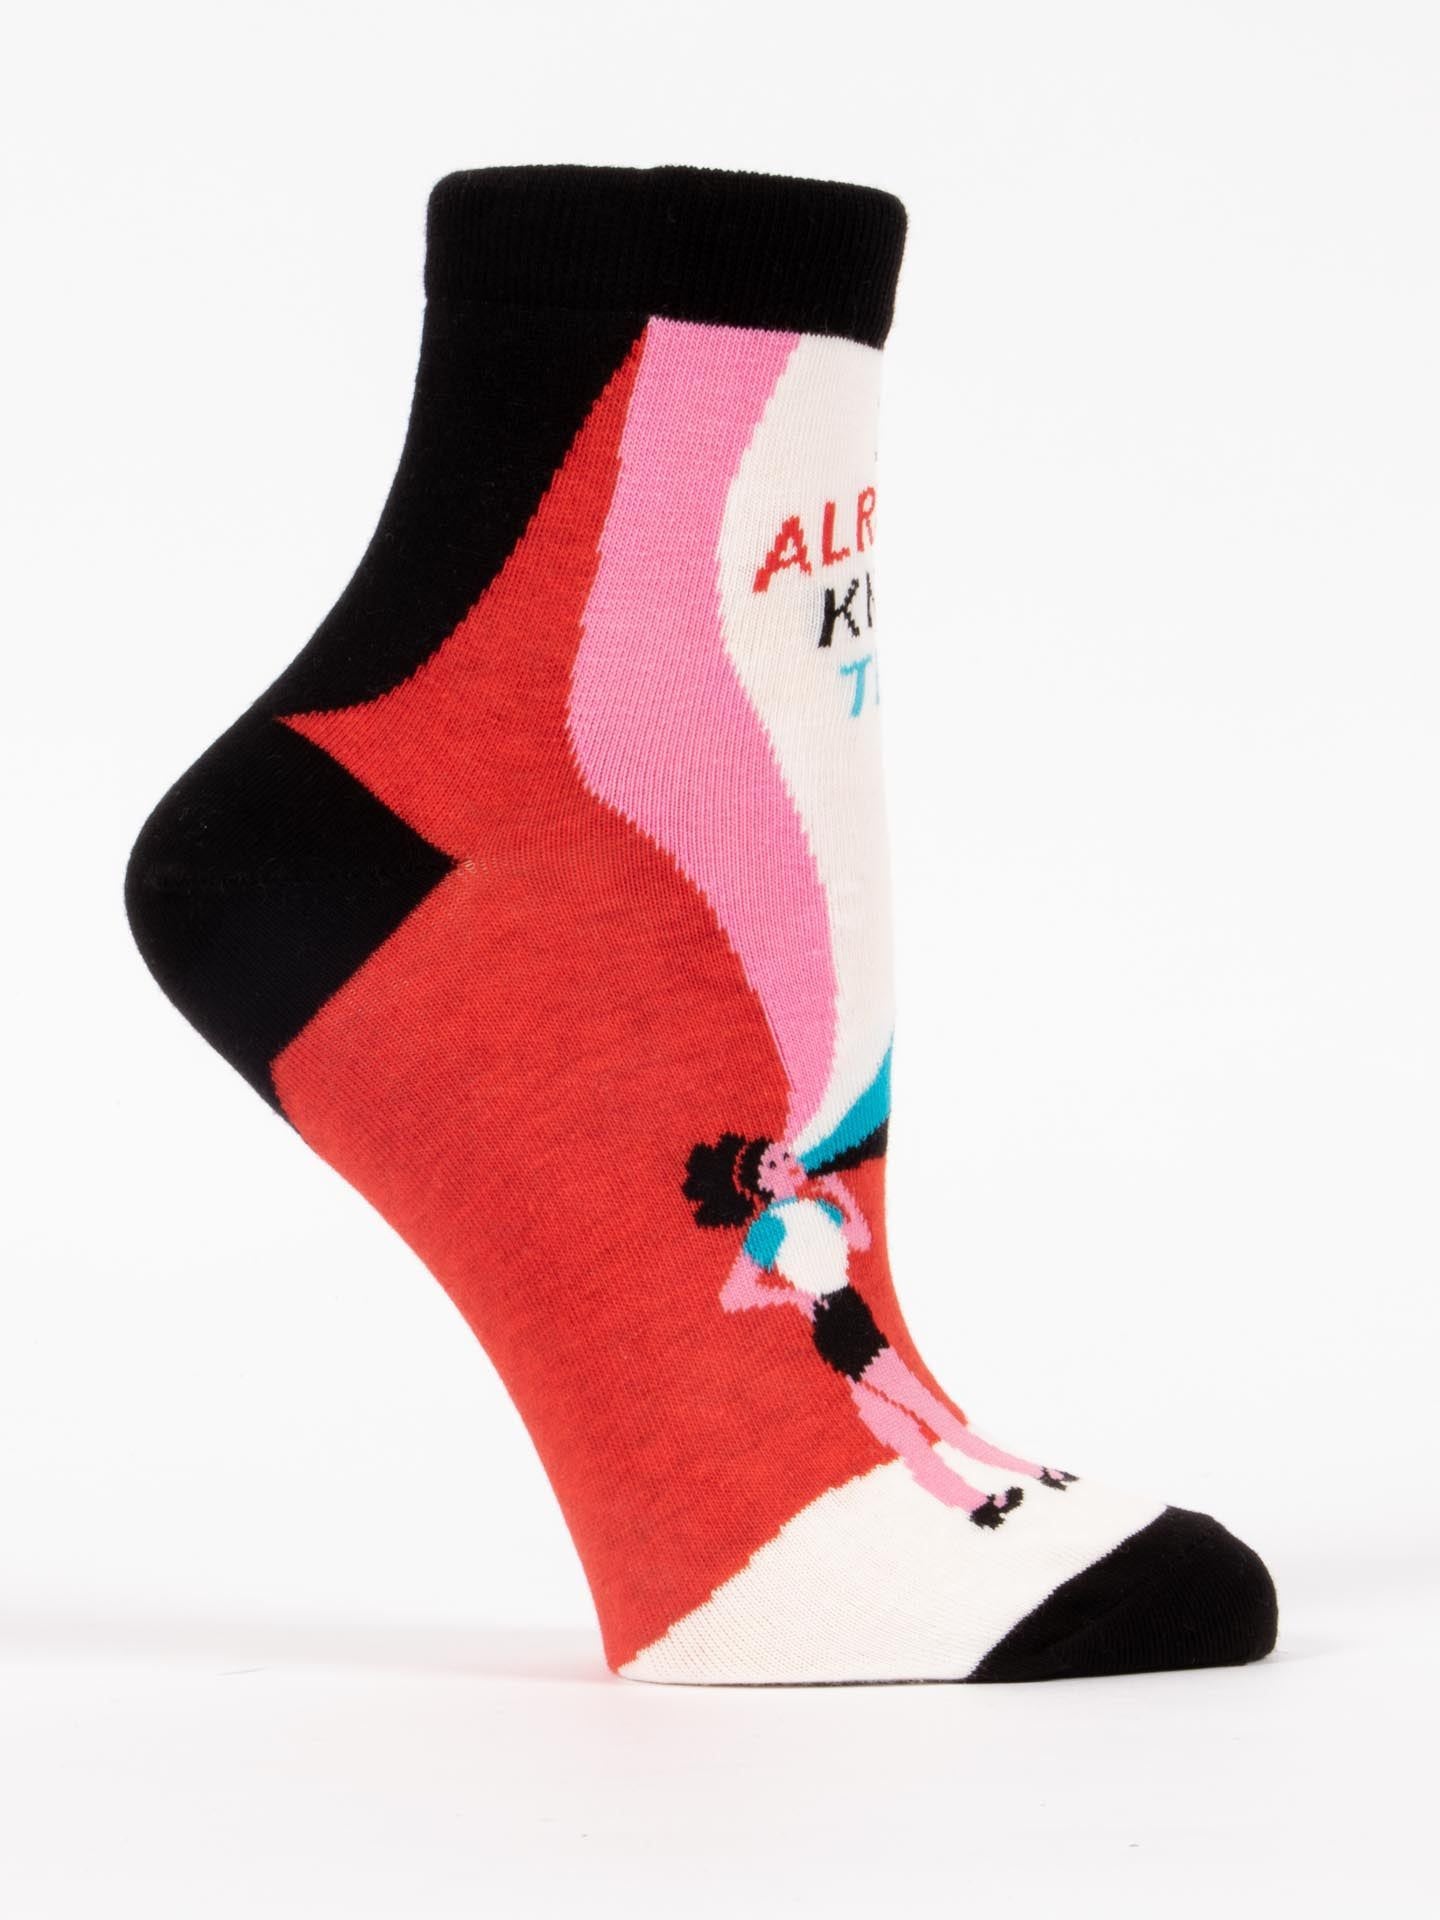 I Already Knew That Women's Ankle Socks-Apparel > Apparel & Accessories > Clothing > Underwear & Socks-Quinn's Mercantile